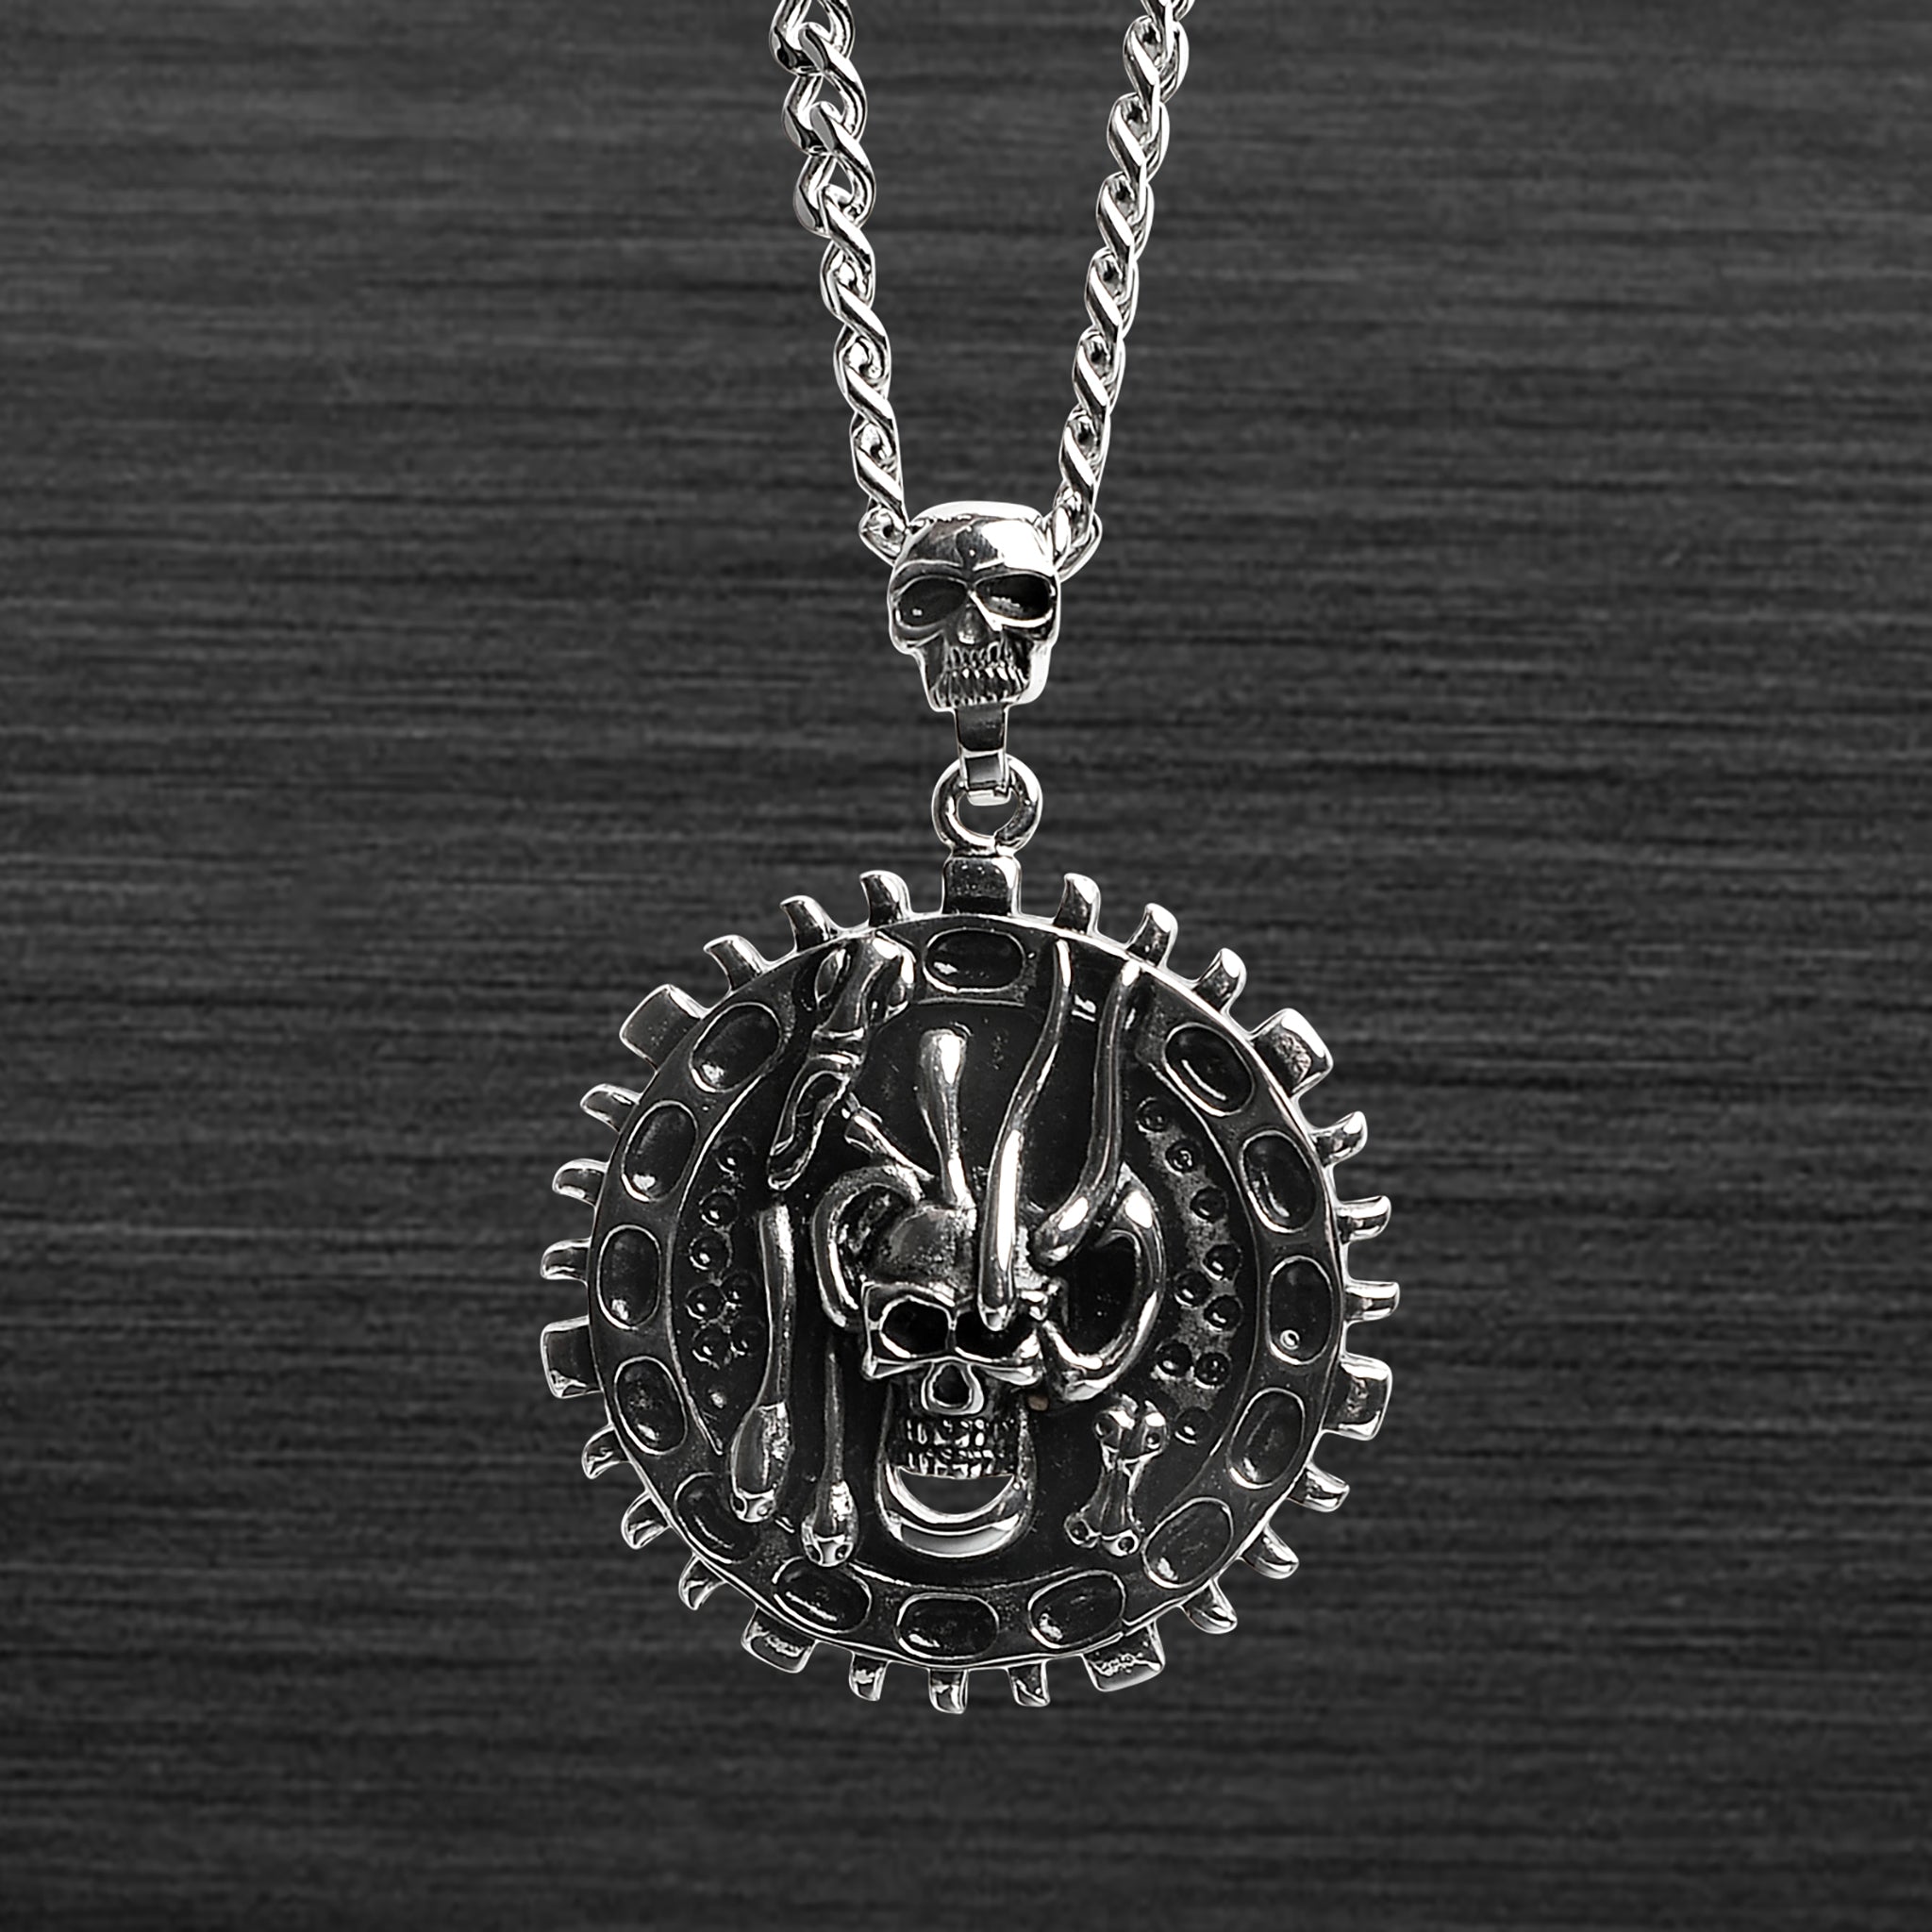 Stainless Steel Large SKULL And Snakes Spike Shield Curb Chain Necklace / PDL2027-RTL